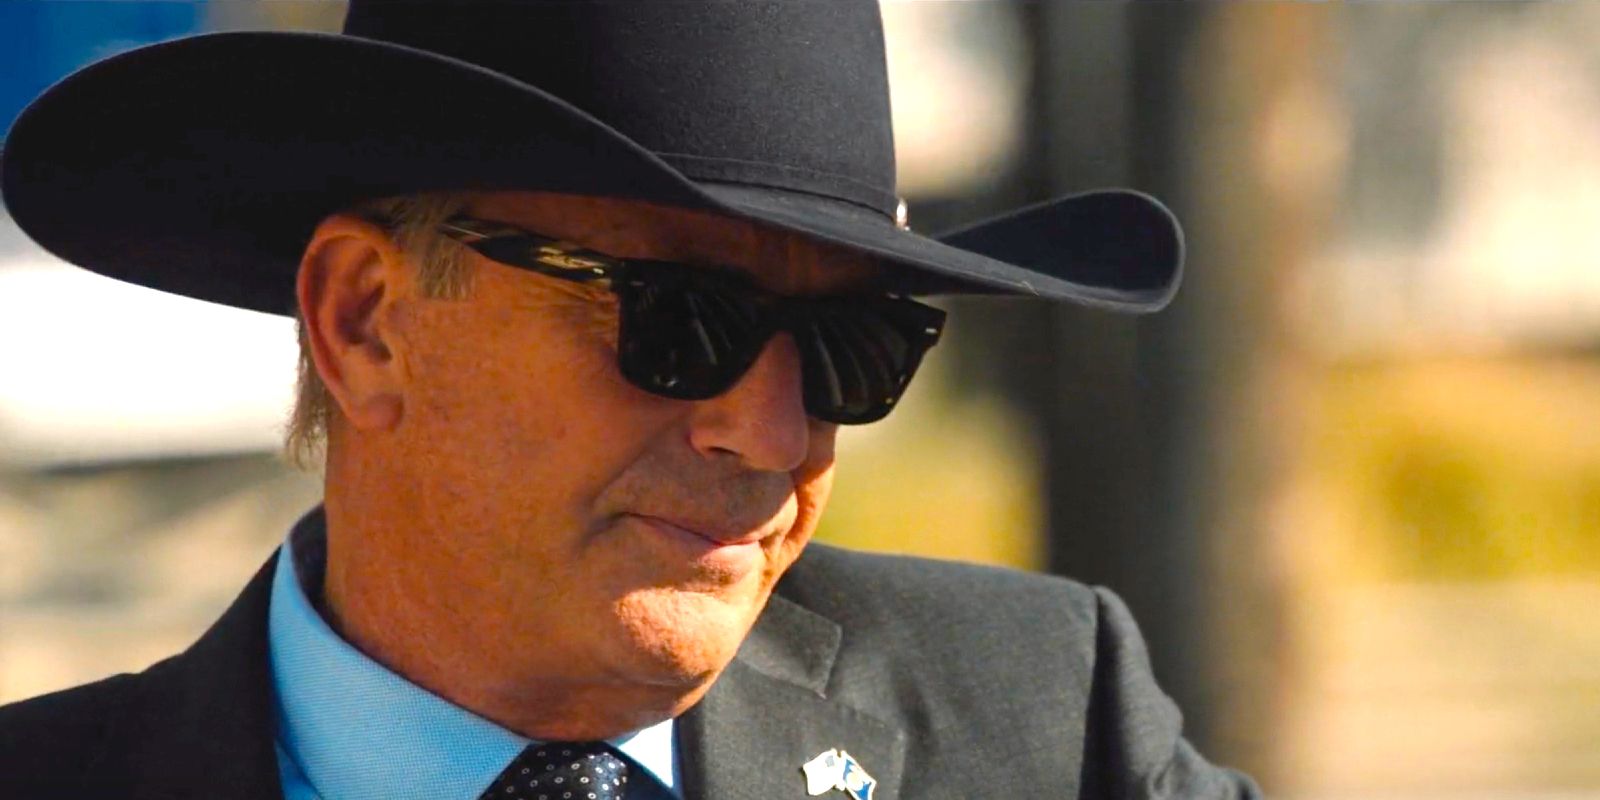 Kevin Costner as John Dutton wearing a black cowboy hat and sunglasses in Yellowstone season 5 episode 8